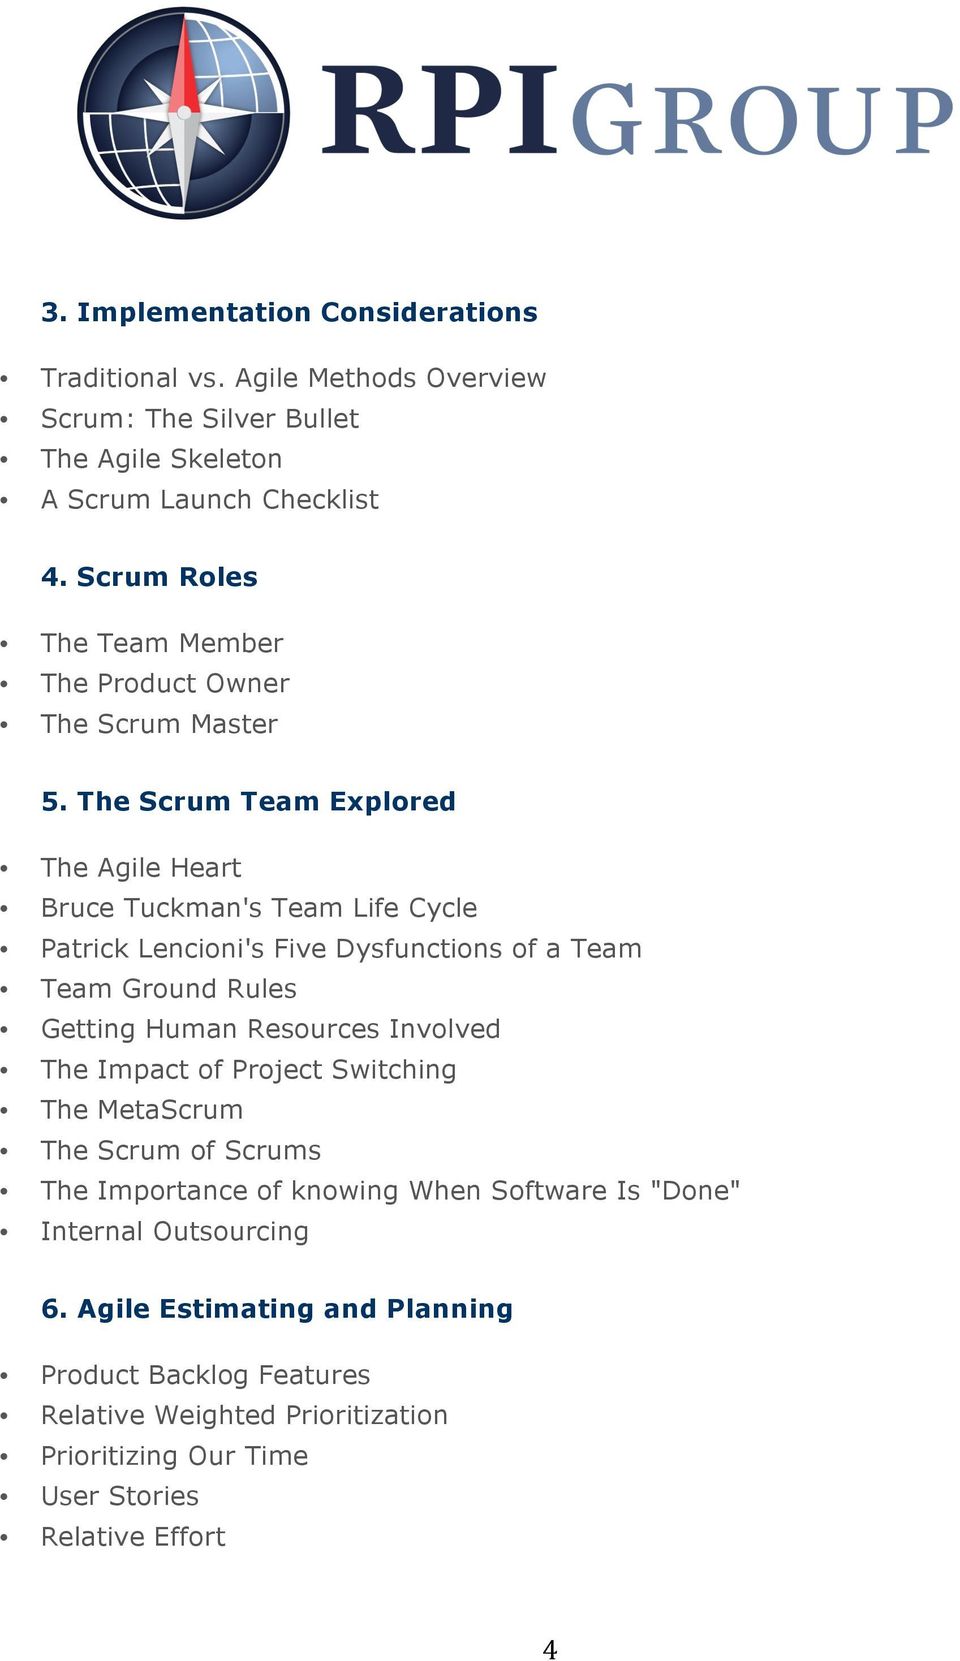 The Scrum Team Explored The Agile Heart Bruce Tuckman's Team Life Cycle Patrick Lencioni's Five Dysfunctions of a Team Team Ground Rules Getting Human Resources